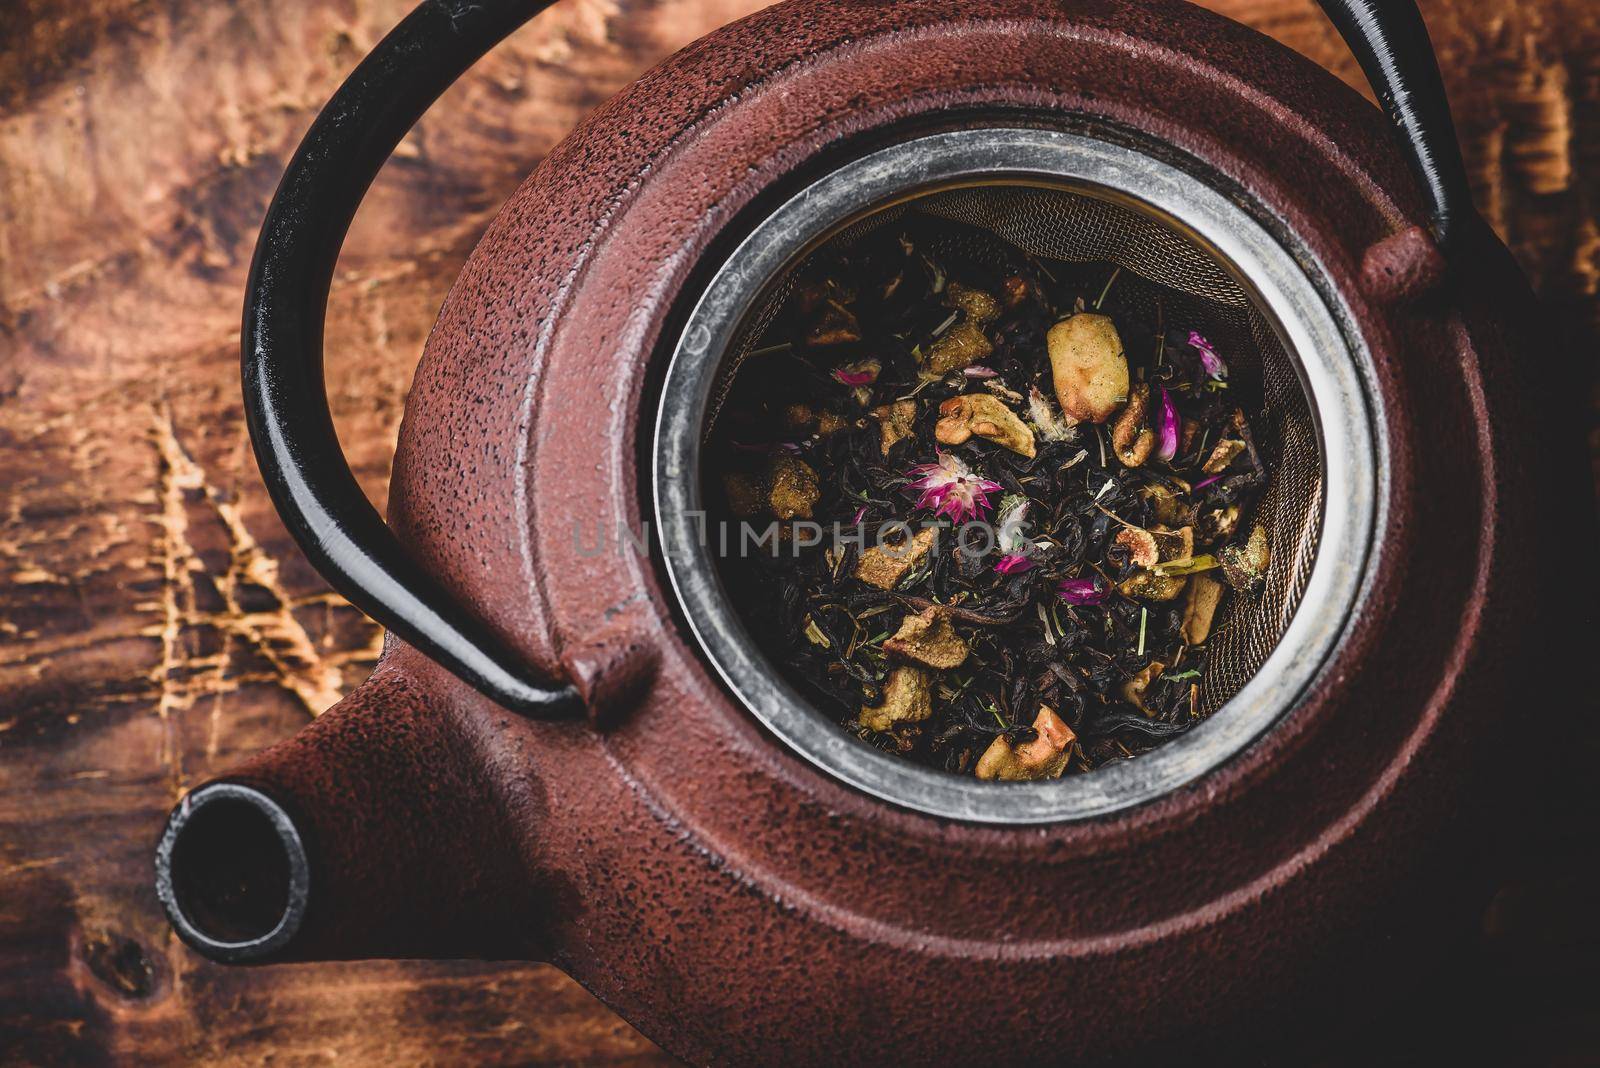 Preparing herbal tea with fruit pieces. High angle view